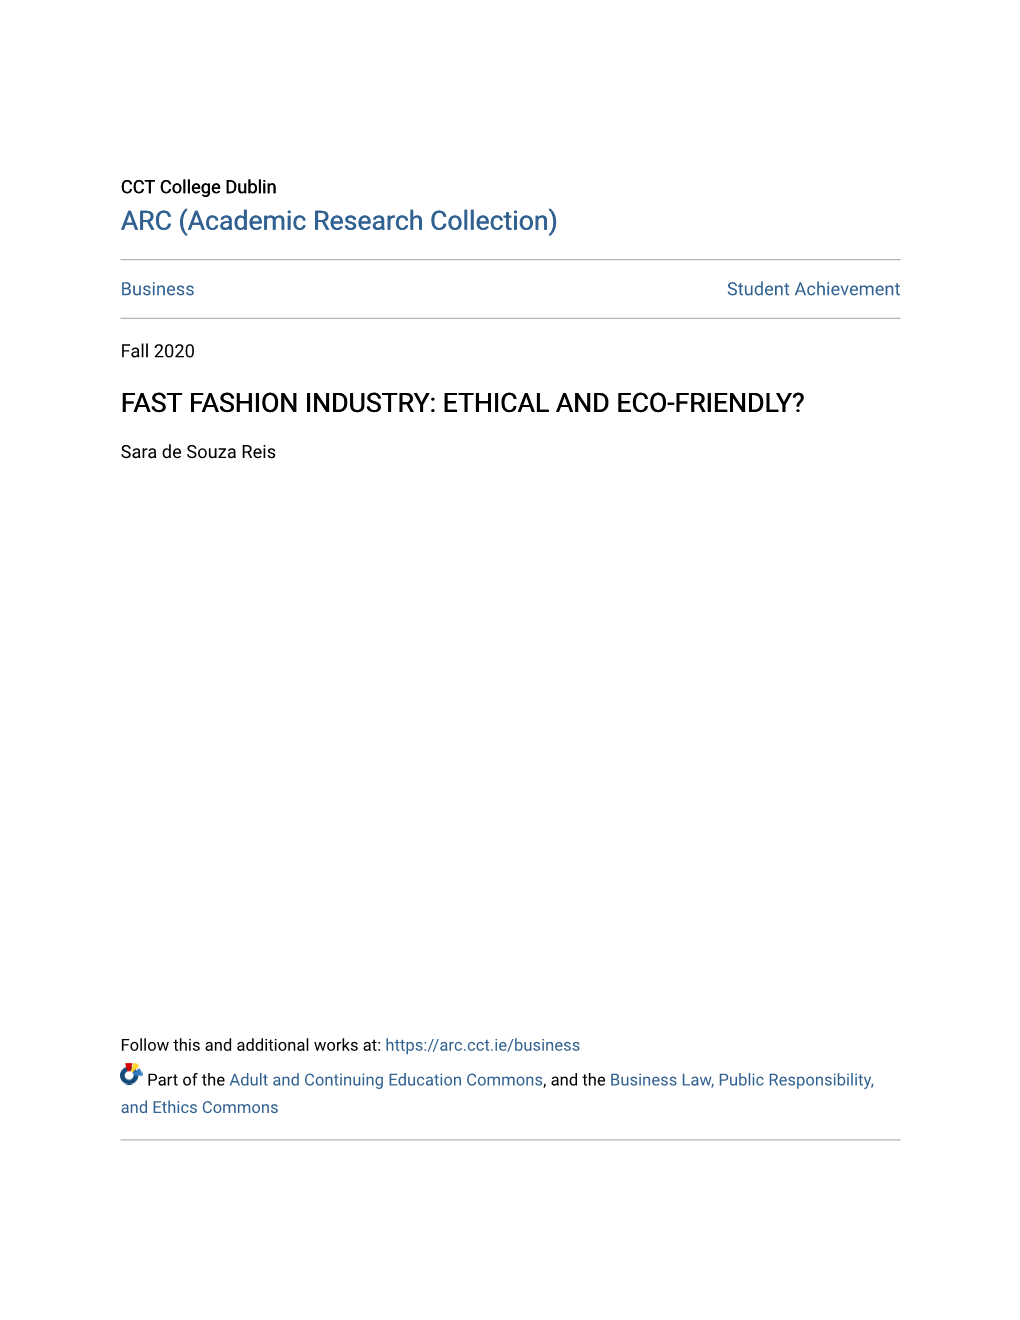 Fast Fashion Industry: Ethical and Eco-Friendly?